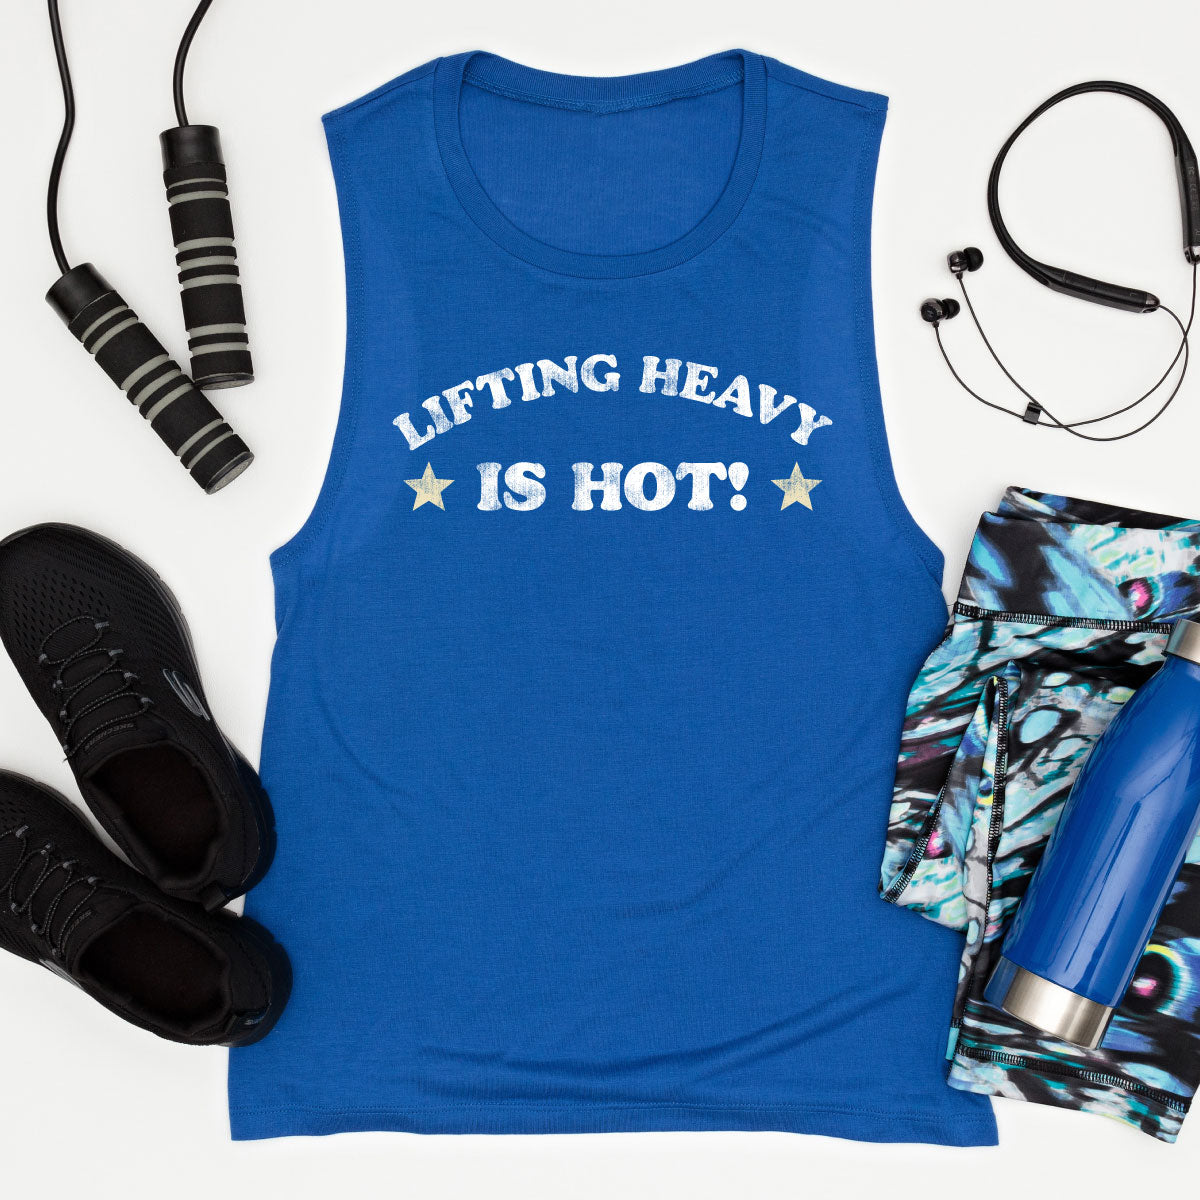 Lifting Heavy is Hot Women’s Fitted V.I.T.™ Festival Tank